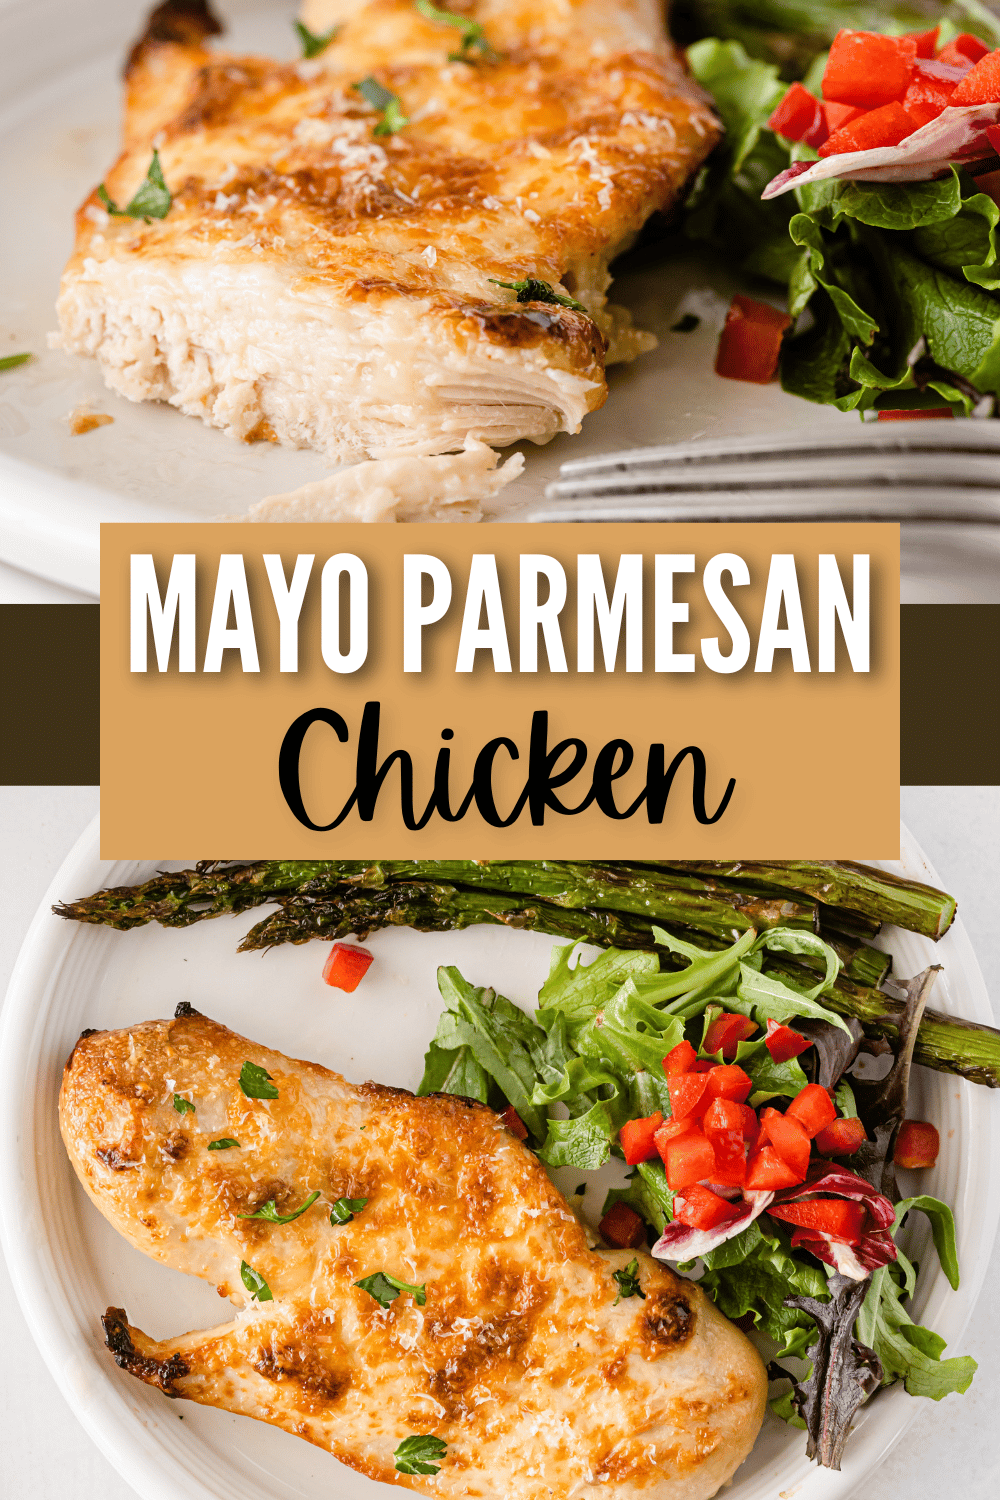 This Mayo Parmesan Chicken is the perfect dinner for busy weeknights. With only a few simple ingredients, it's ready in about 30 minutes. #mayoparmesanchicken #parmesanchicken #chicken #dinnerrecipe #chickenrecipe via @wondermomwannab